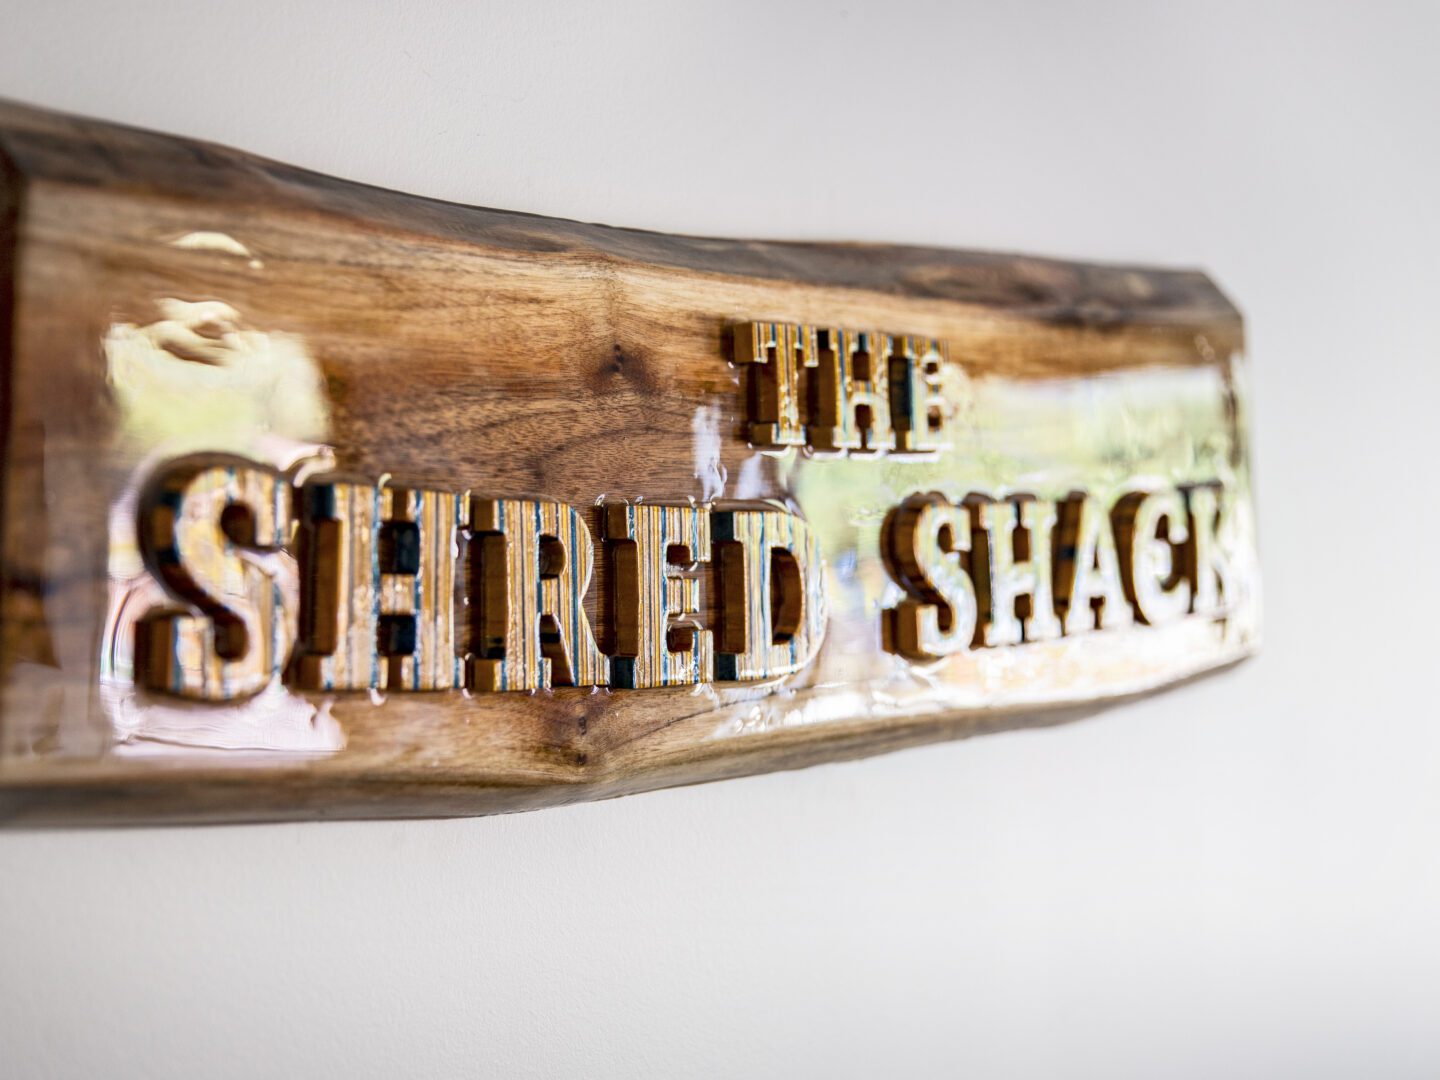 Stay Revy - The Shred Shack